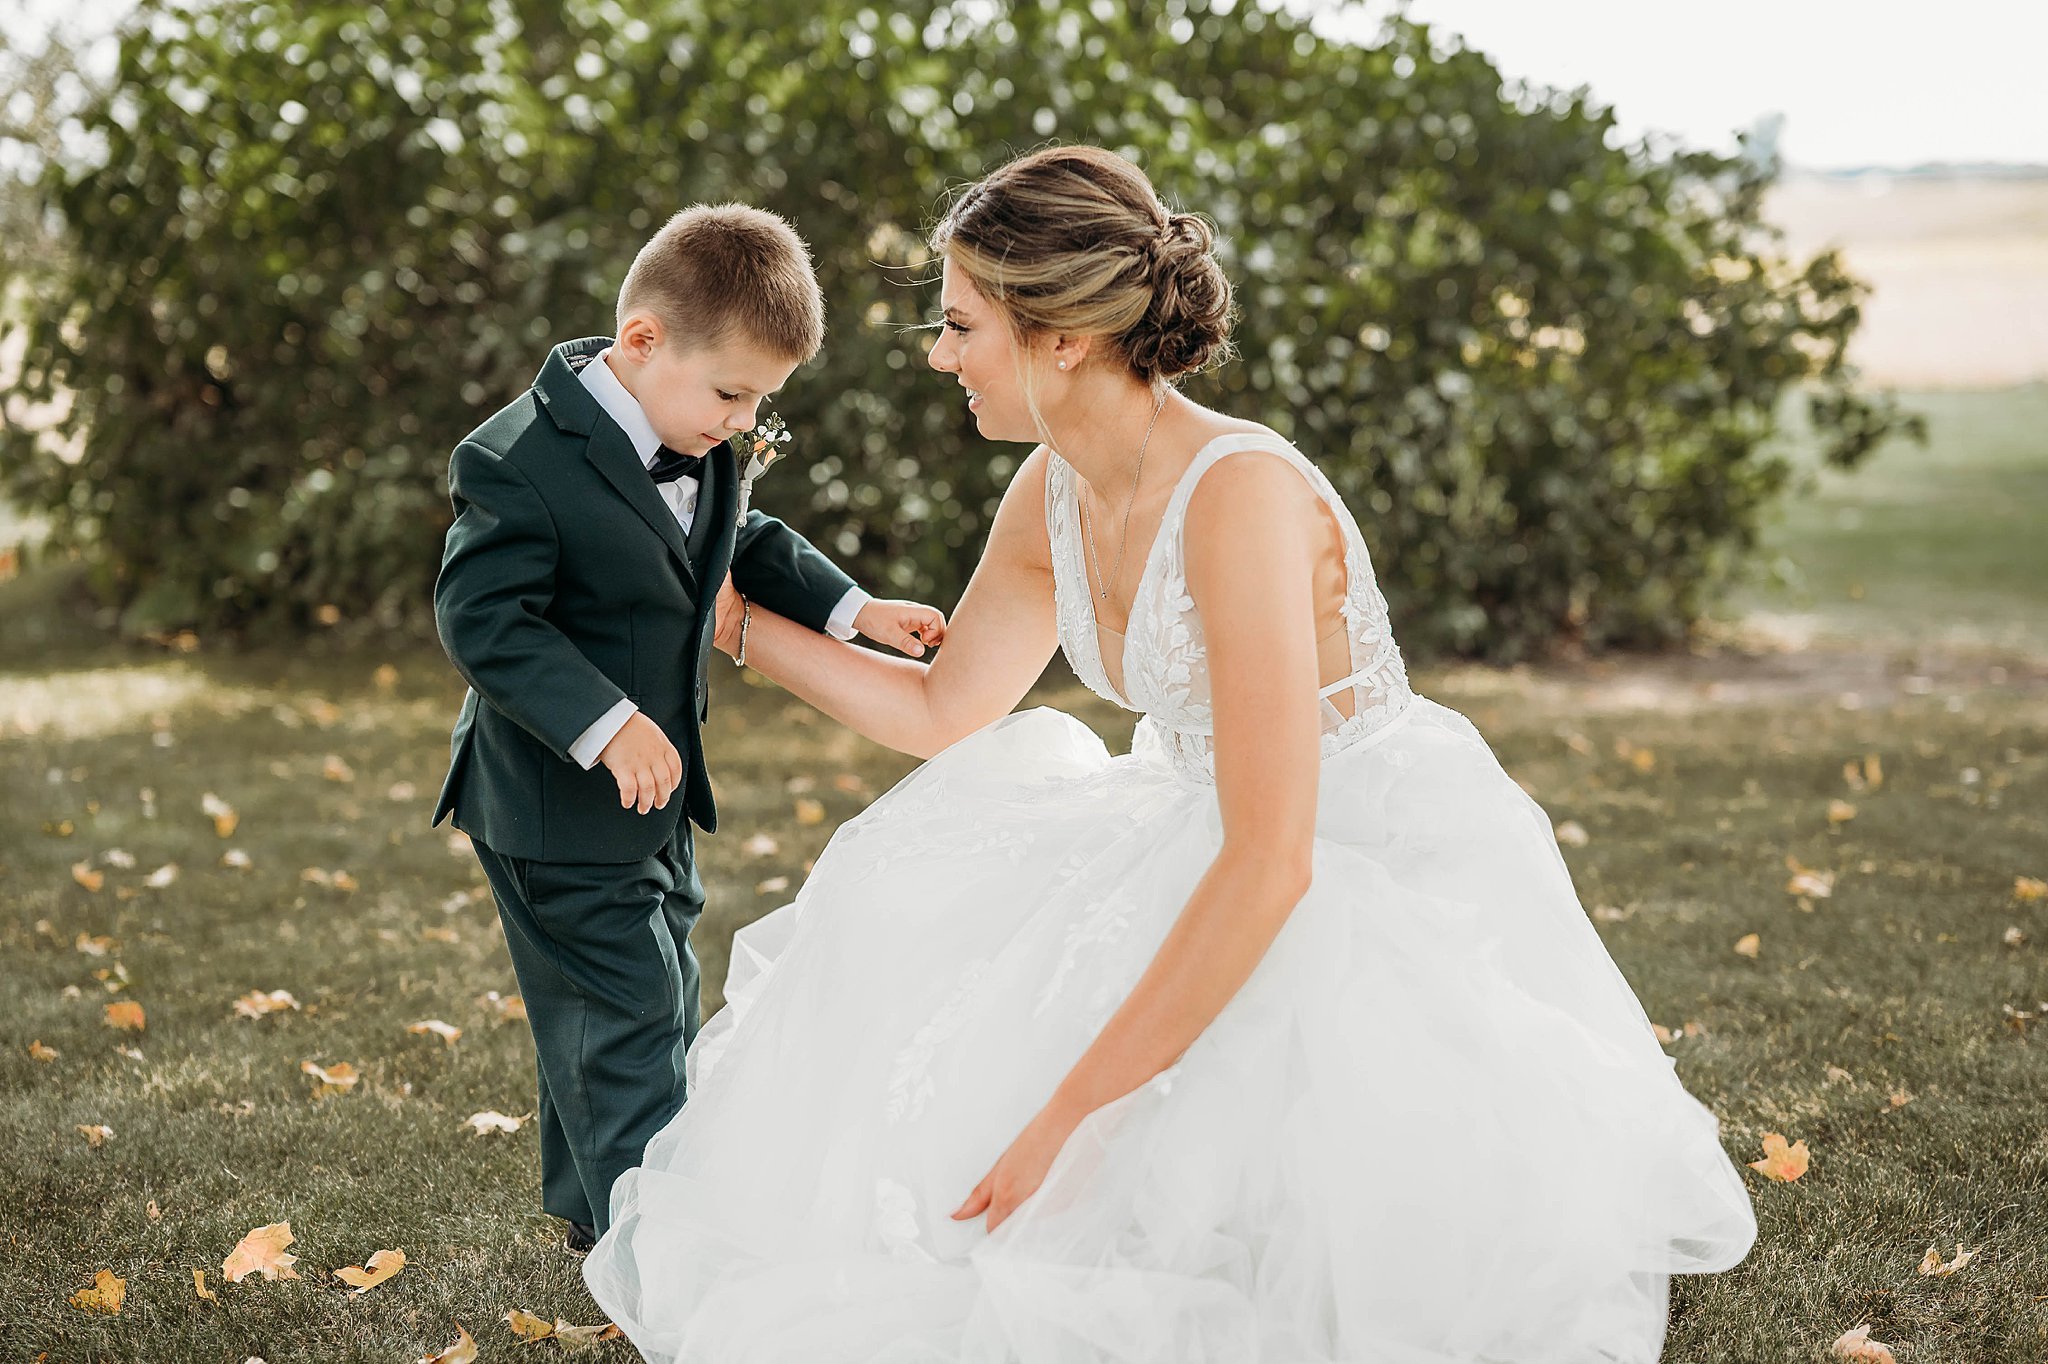 Mother and son share wedding moment